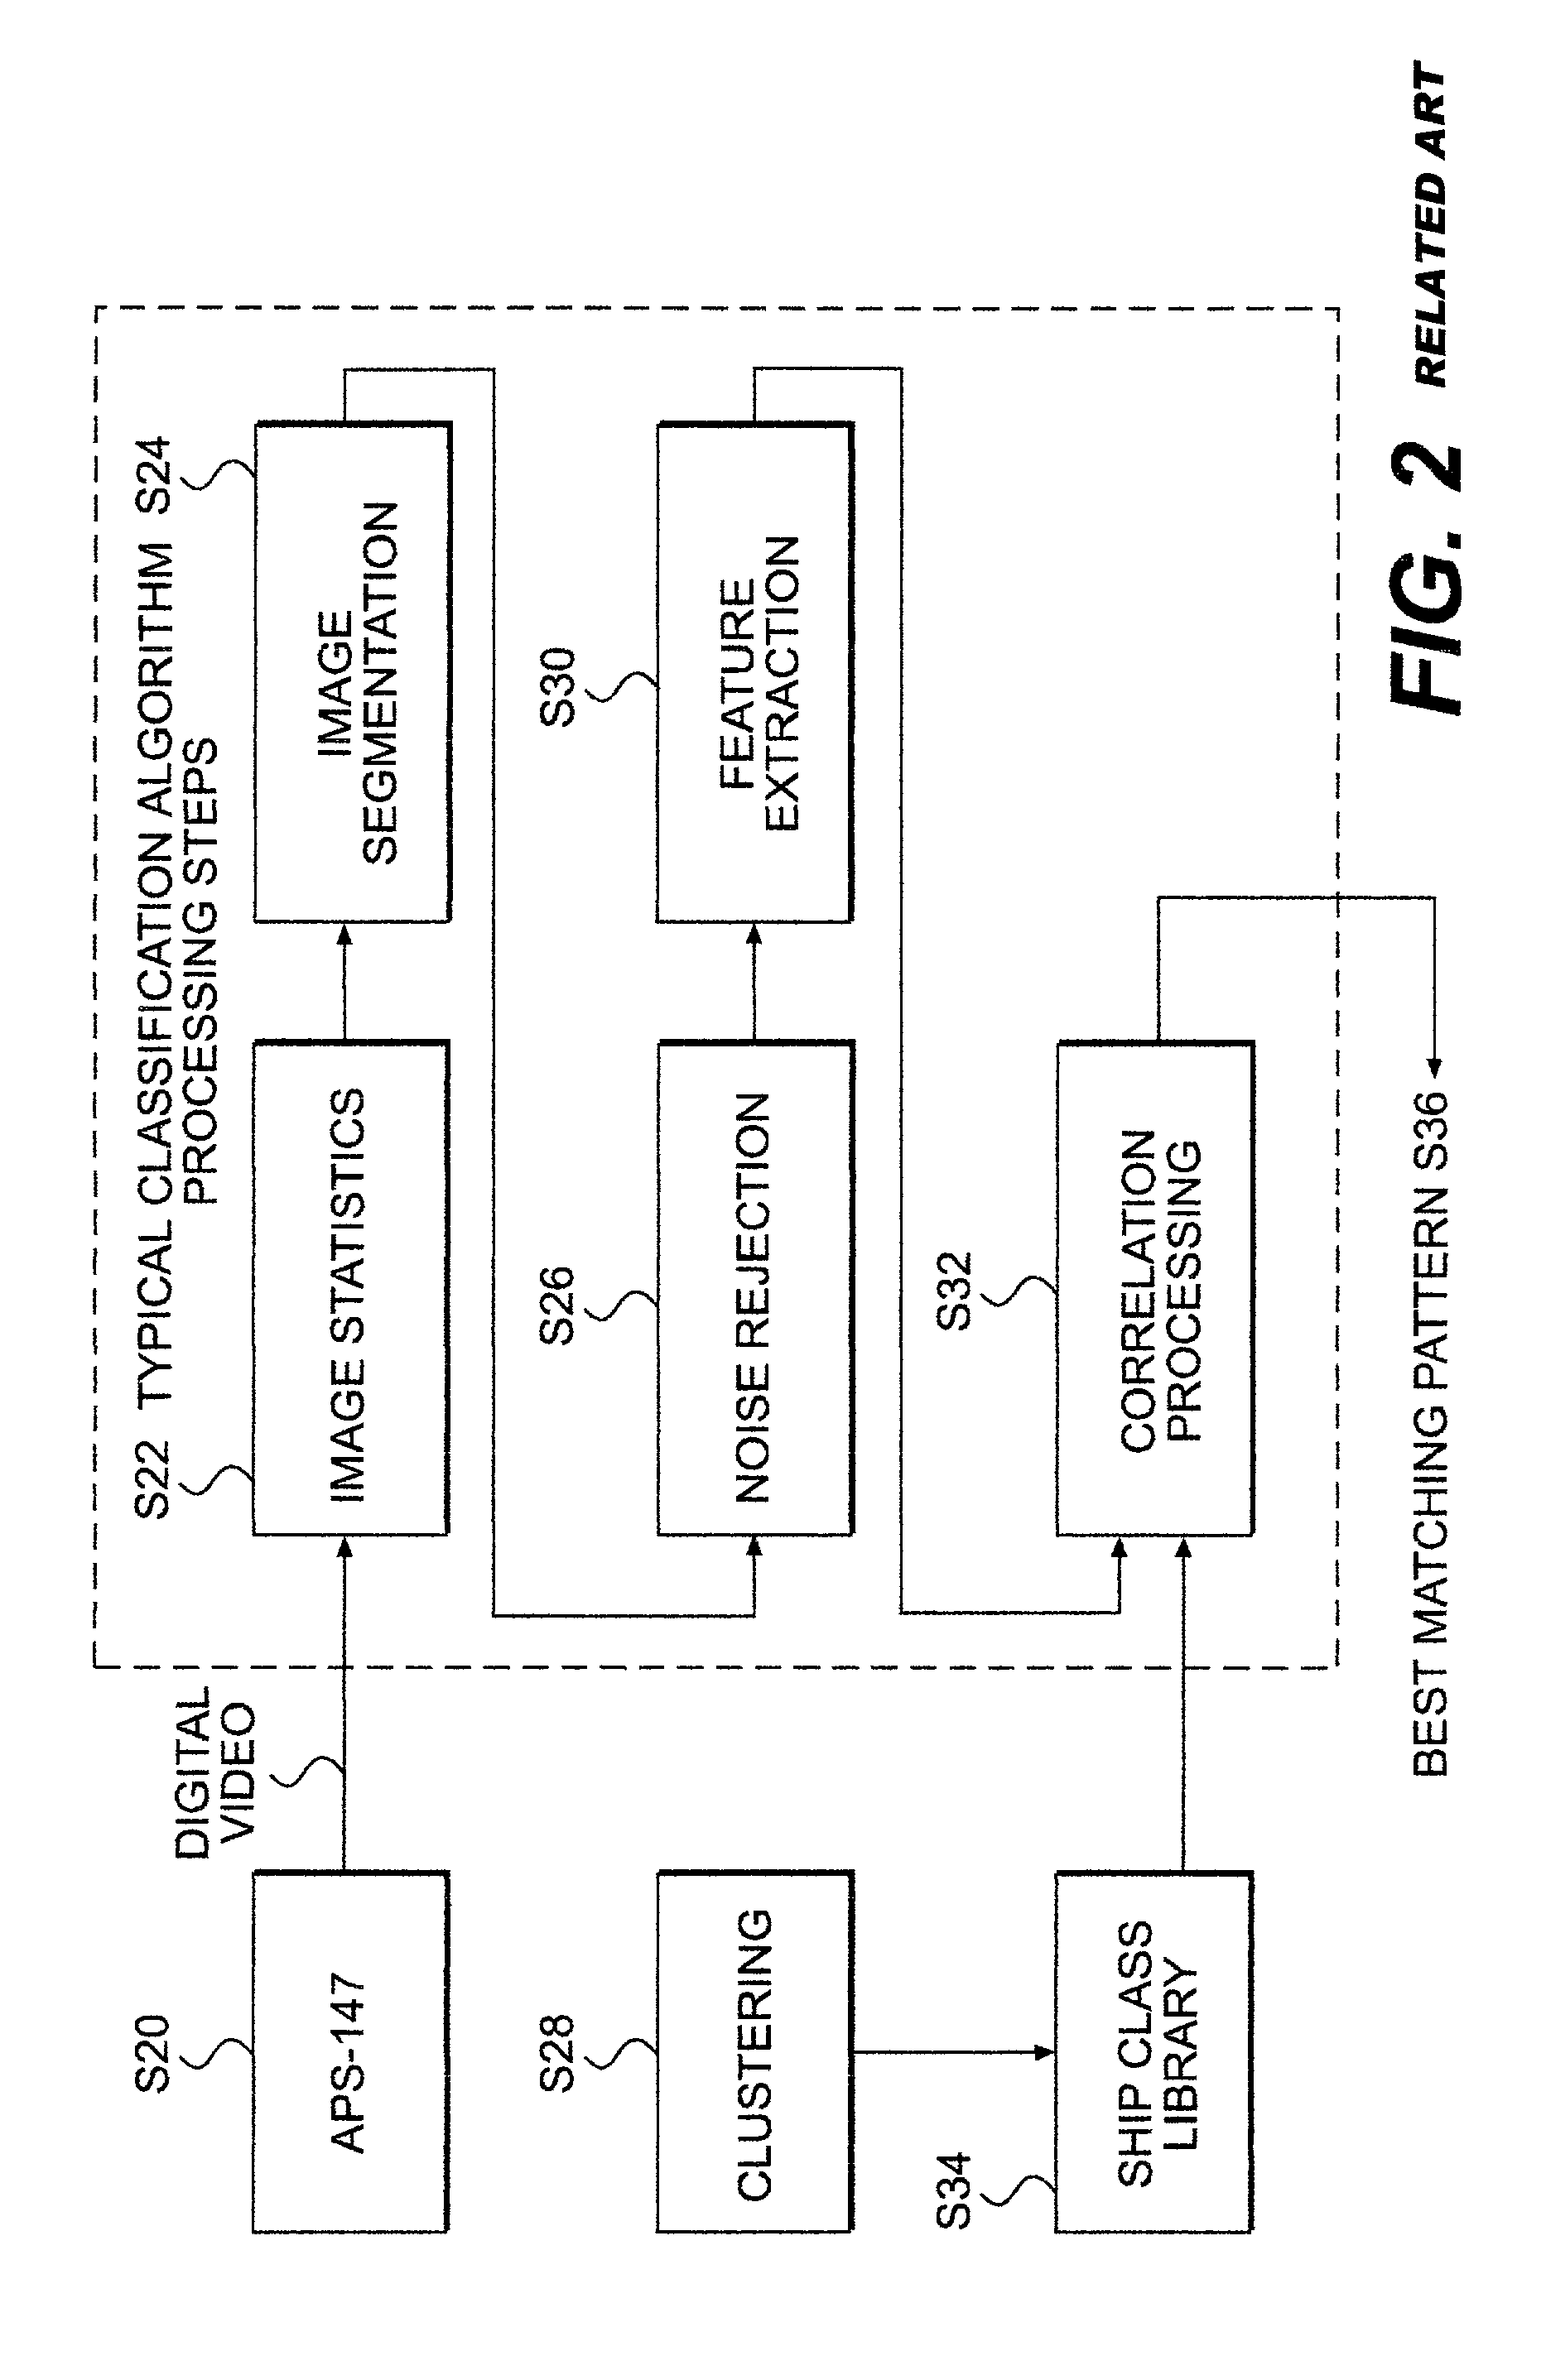 A-Scan ISAR classification system and method therefor